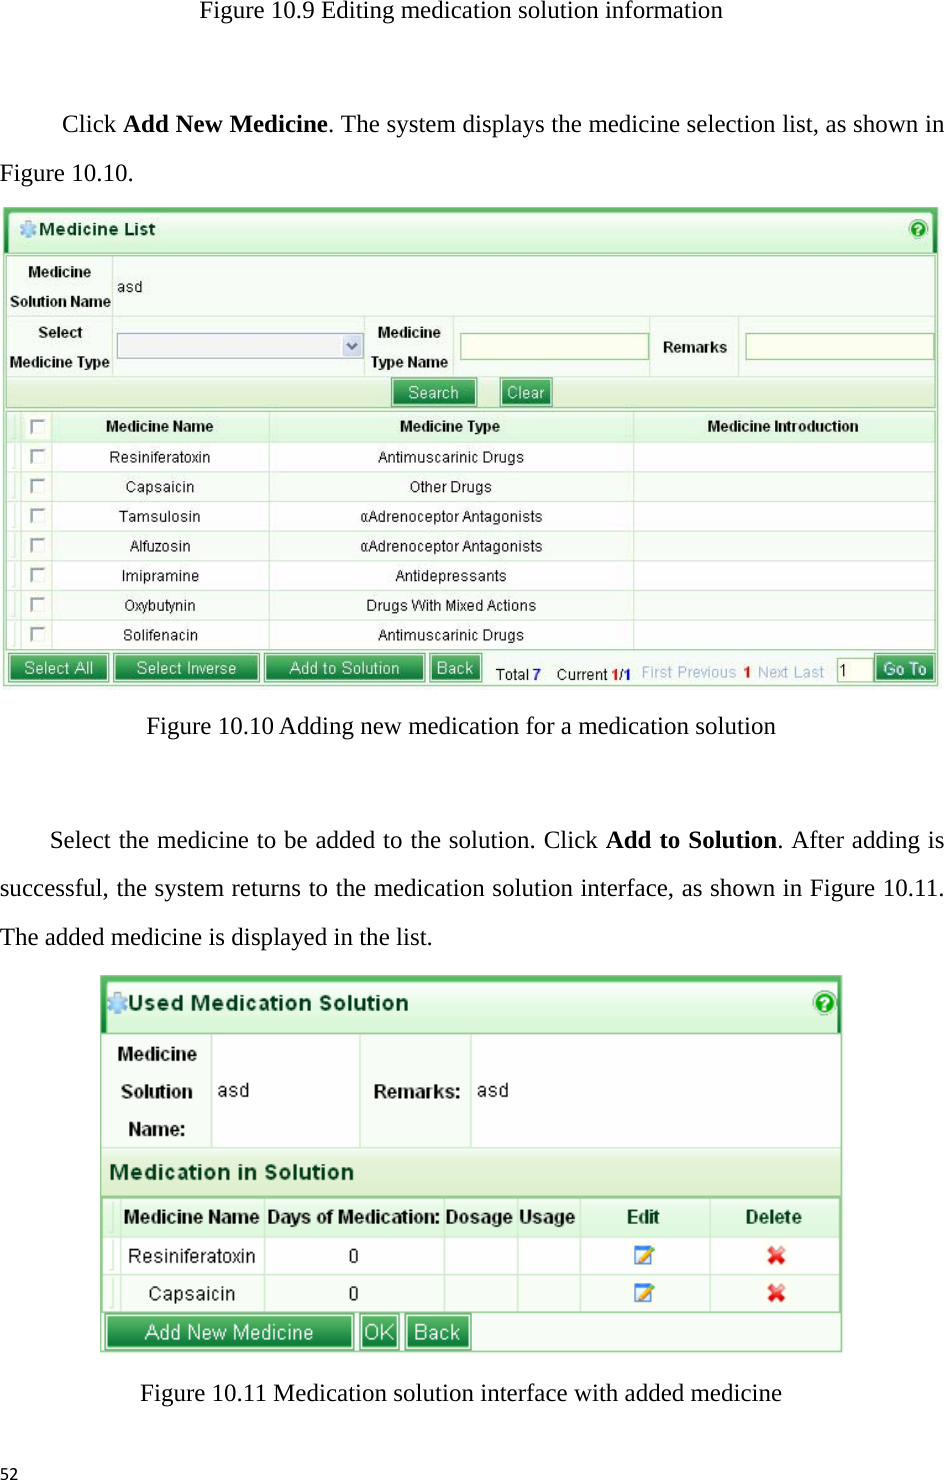 52Figure 10.9 Editing medication solution information  Click Add New Medicine. The system displays the medicine selection list, as shown in Figure 10.10.    Figure 10.10 Adding new medication for a medication solution  Select the medicine to be added to the solution. Click Add to Solution. After adding is successful, the system returns to the medication solution interface, as shown in Figure 10.11. The added medicine is displayed in the list.    Figure 10.11 Medication solution interface with added medicine 